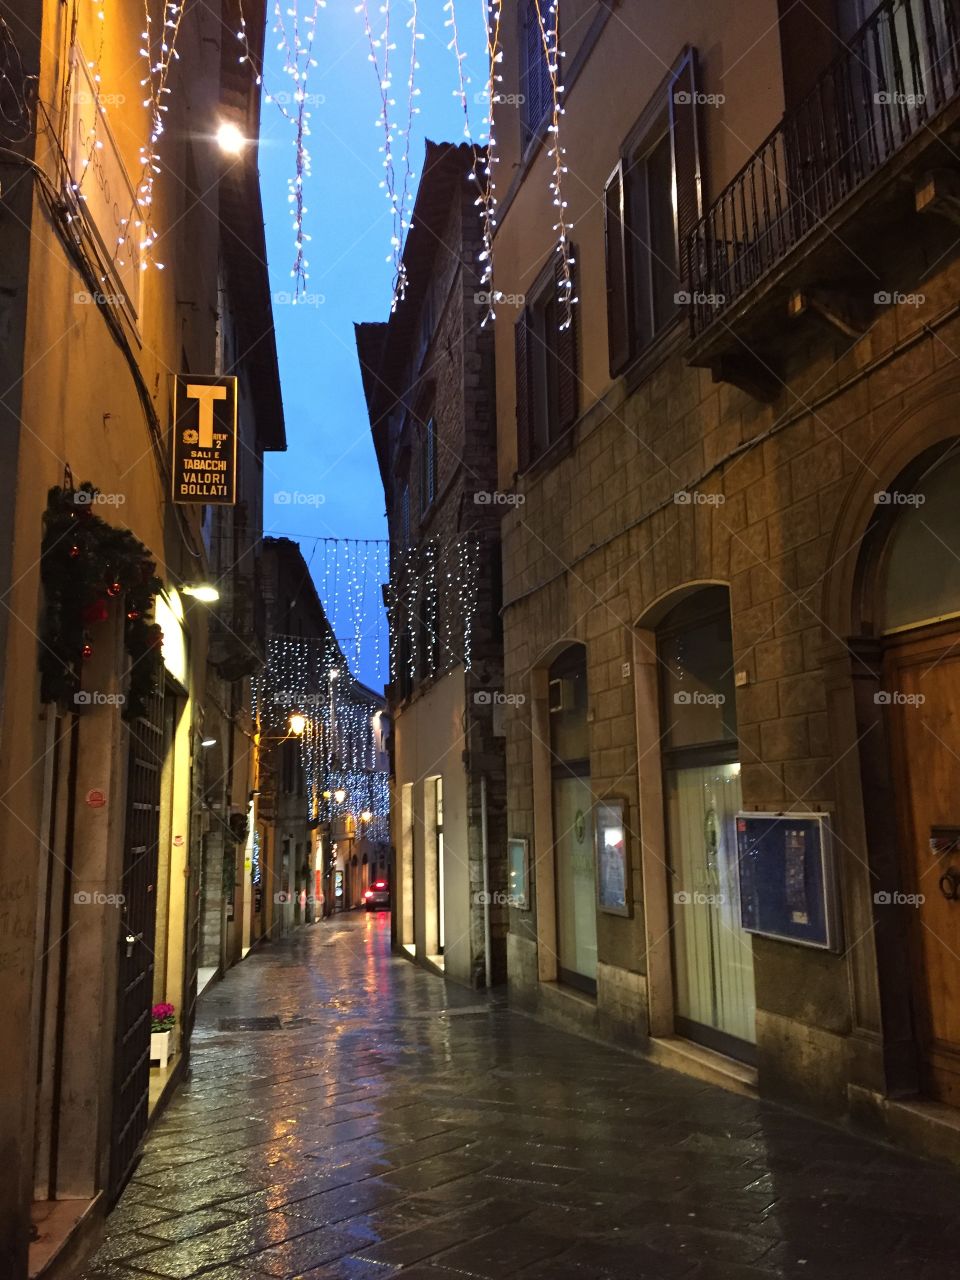 Dusk shot of the streets of Todi, Italy. Shot at dark after a rainy day during the Christmas season. 